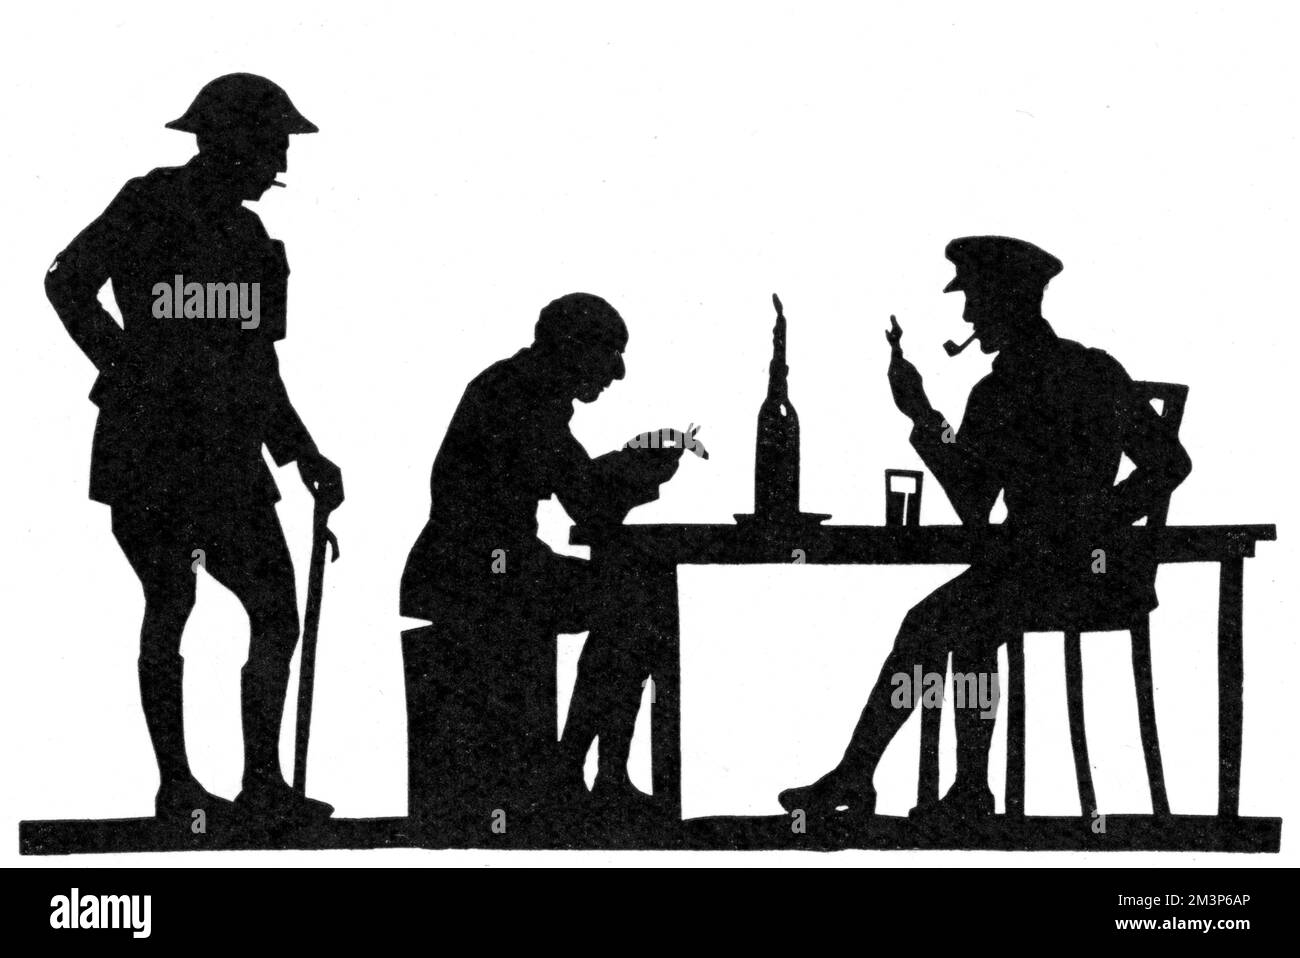 Captain Harry Lawrence Oakley, the famous silhouette artist, pictured cutting the silhouette of a fellow officer in what looks like a dug-out during World War One.      Date: 1920s Stock Photo